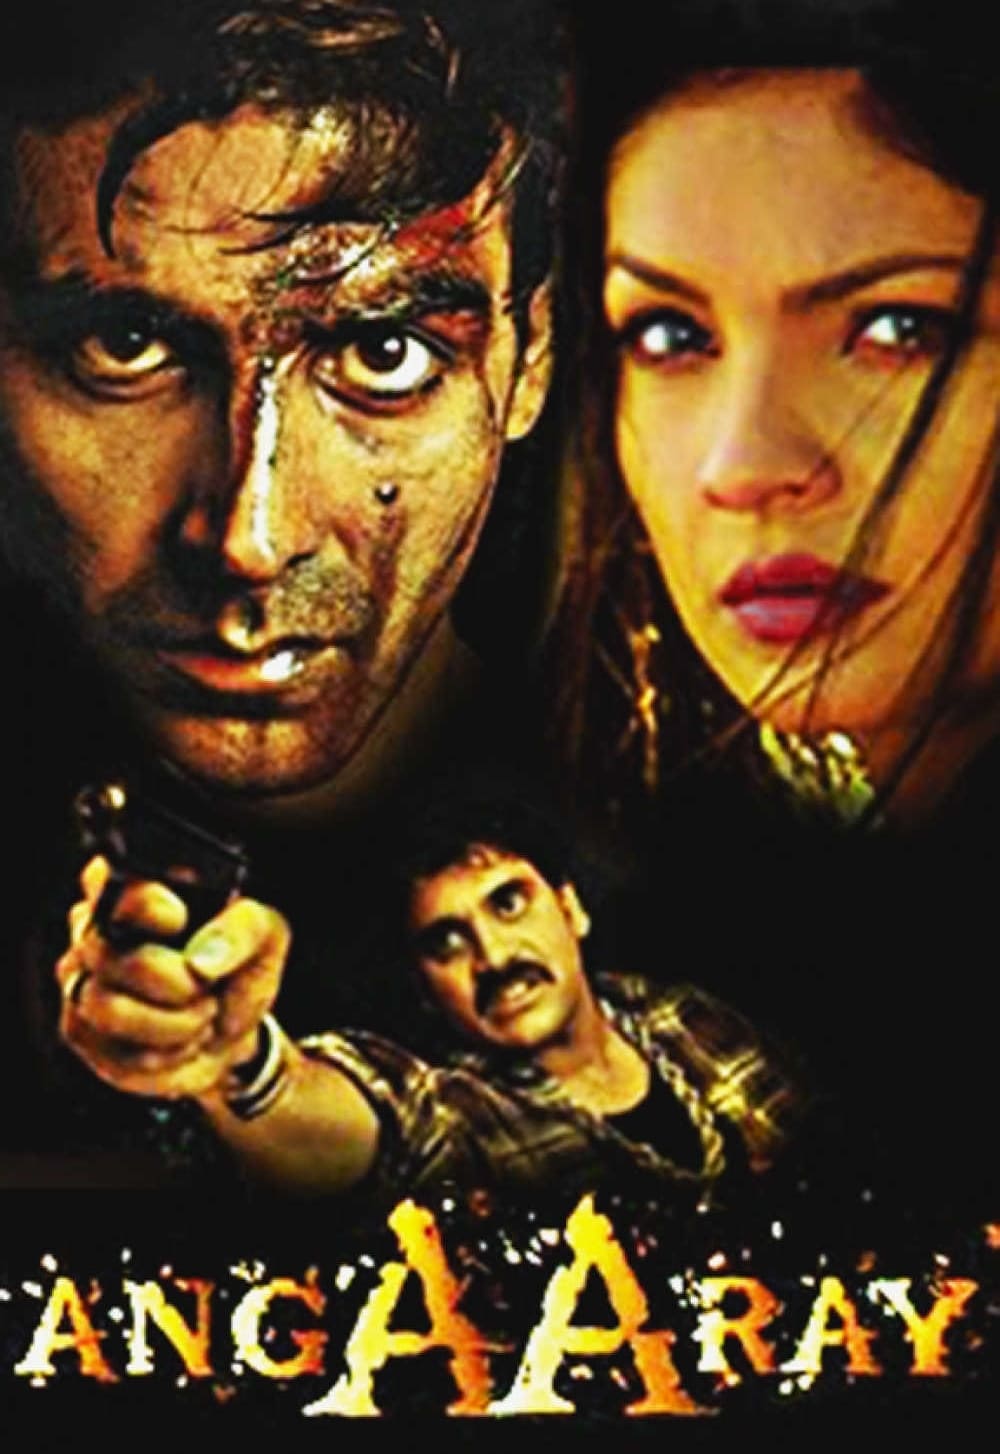 Poster for the movie "Angaaray"